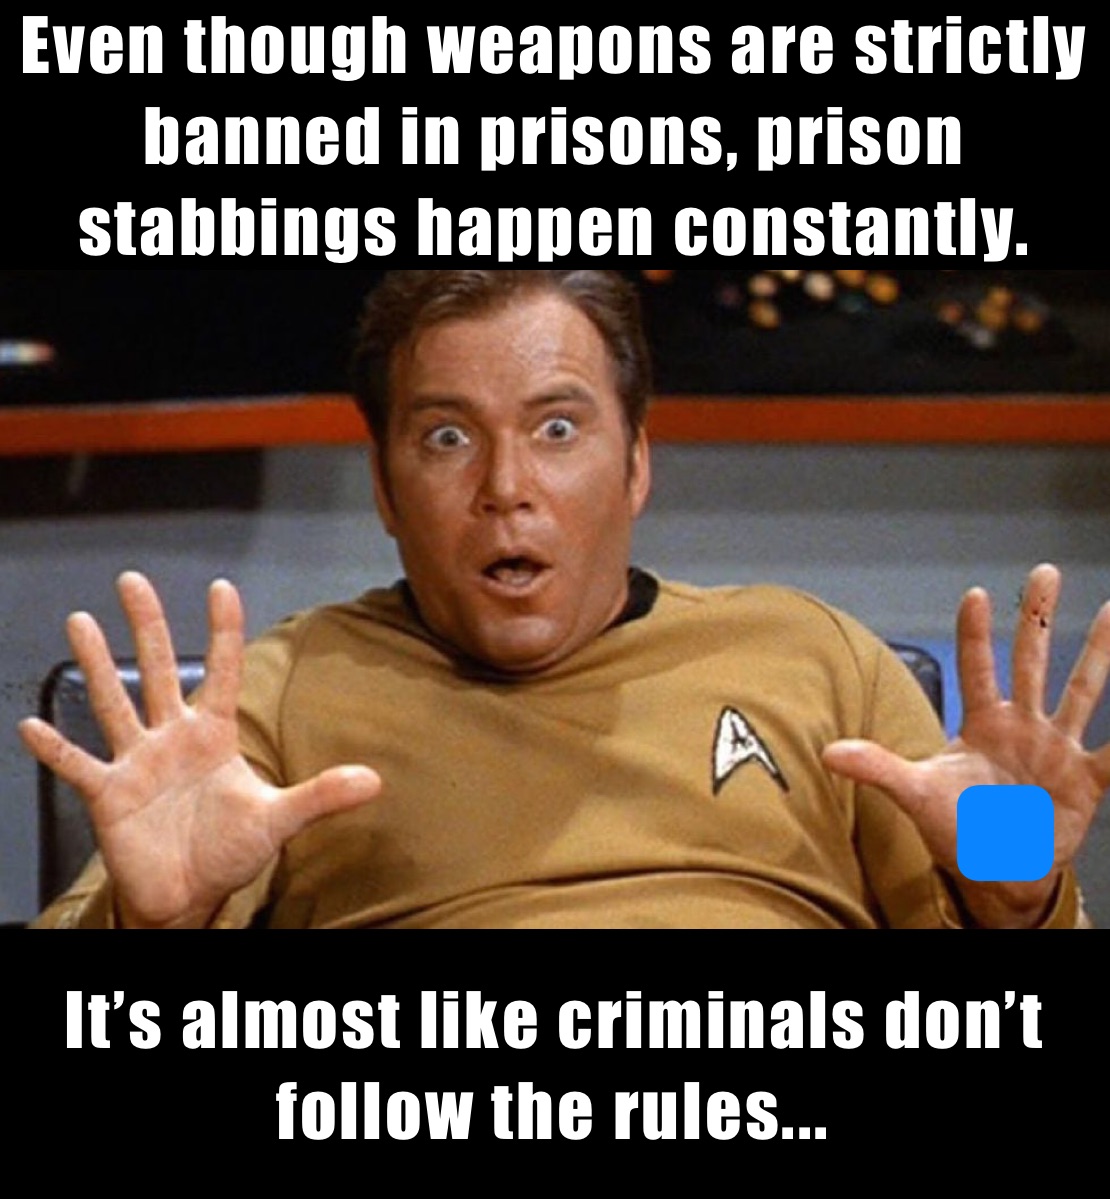 Even though weapons are strictly banned in prisons, prison stabbings happen constantly. It’s almost like criminals don’t follow the rules...￼